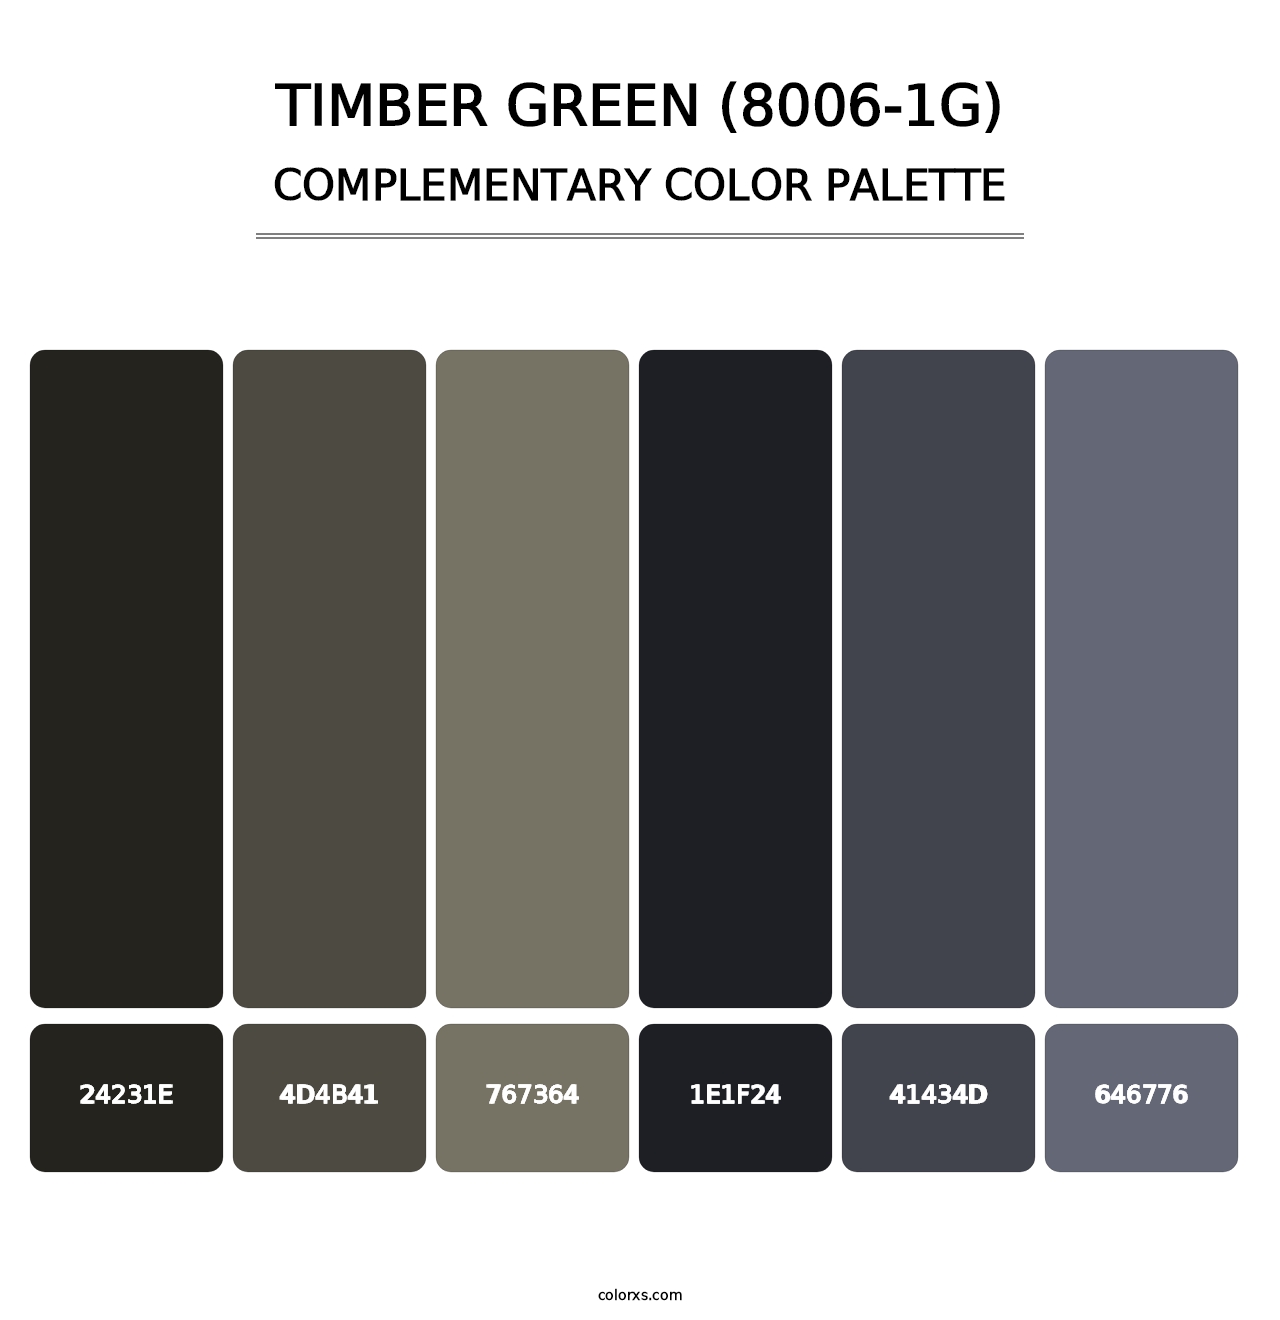 Timber Green (8006-1G) - Complementary Color Palette